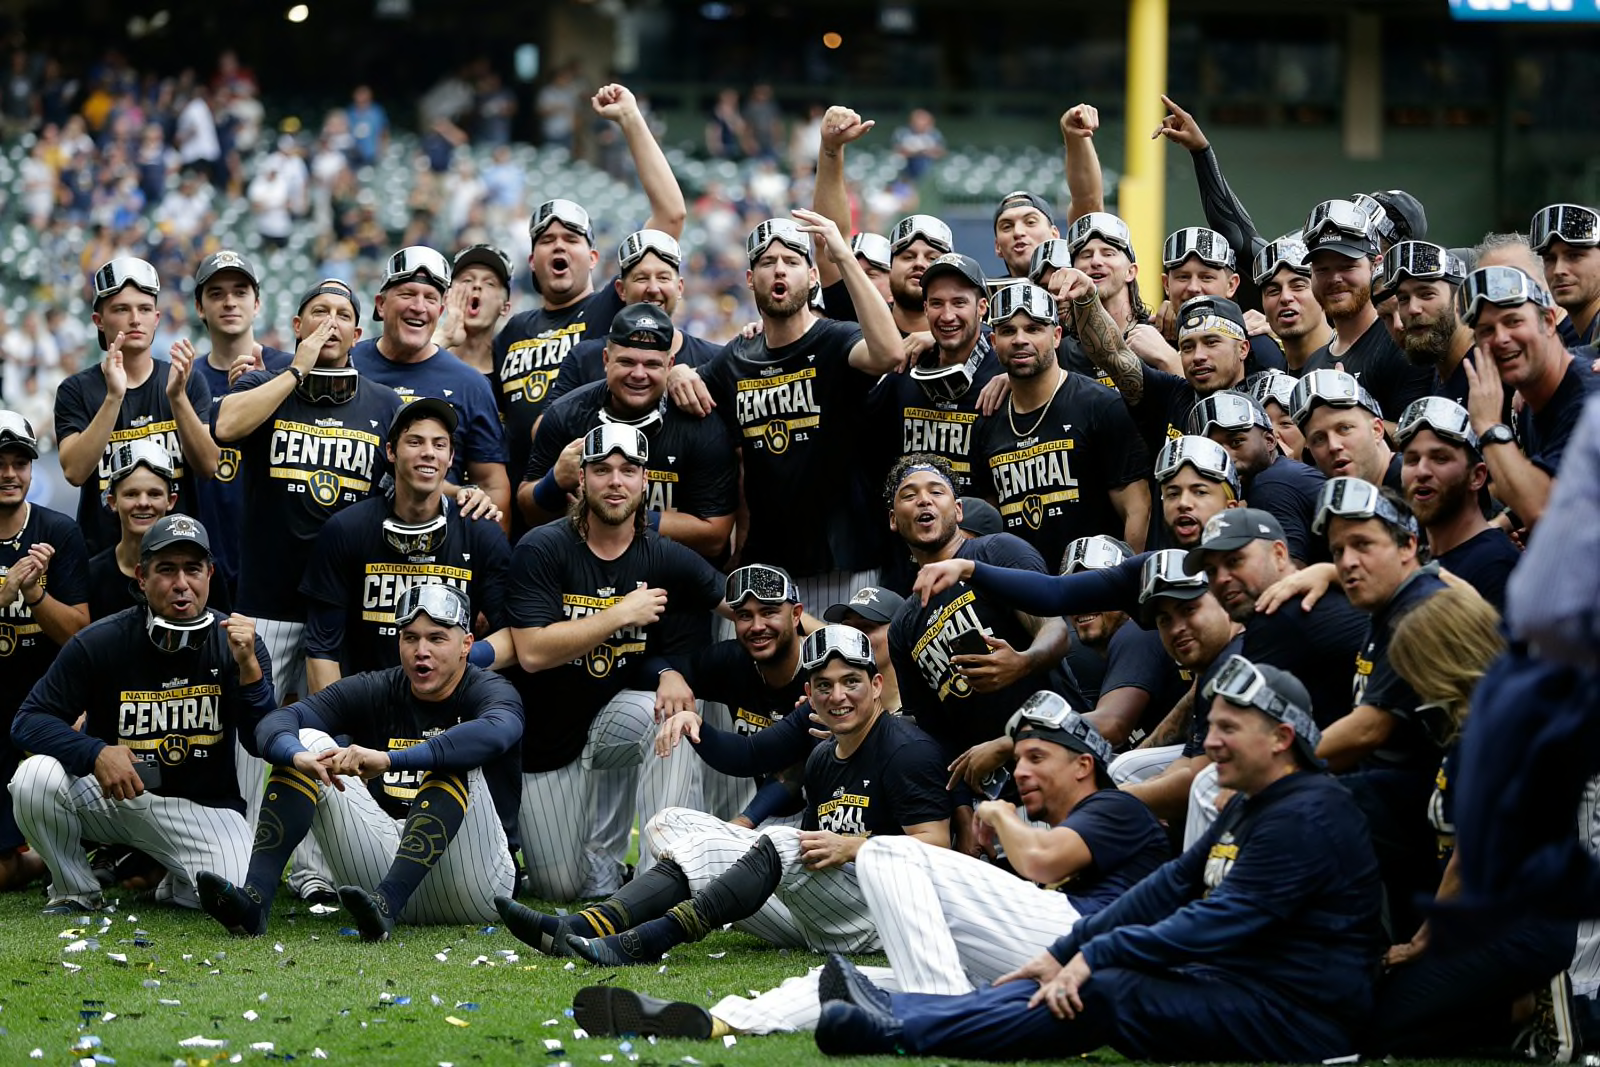 5 things that need to happen for Brewers to win World Series